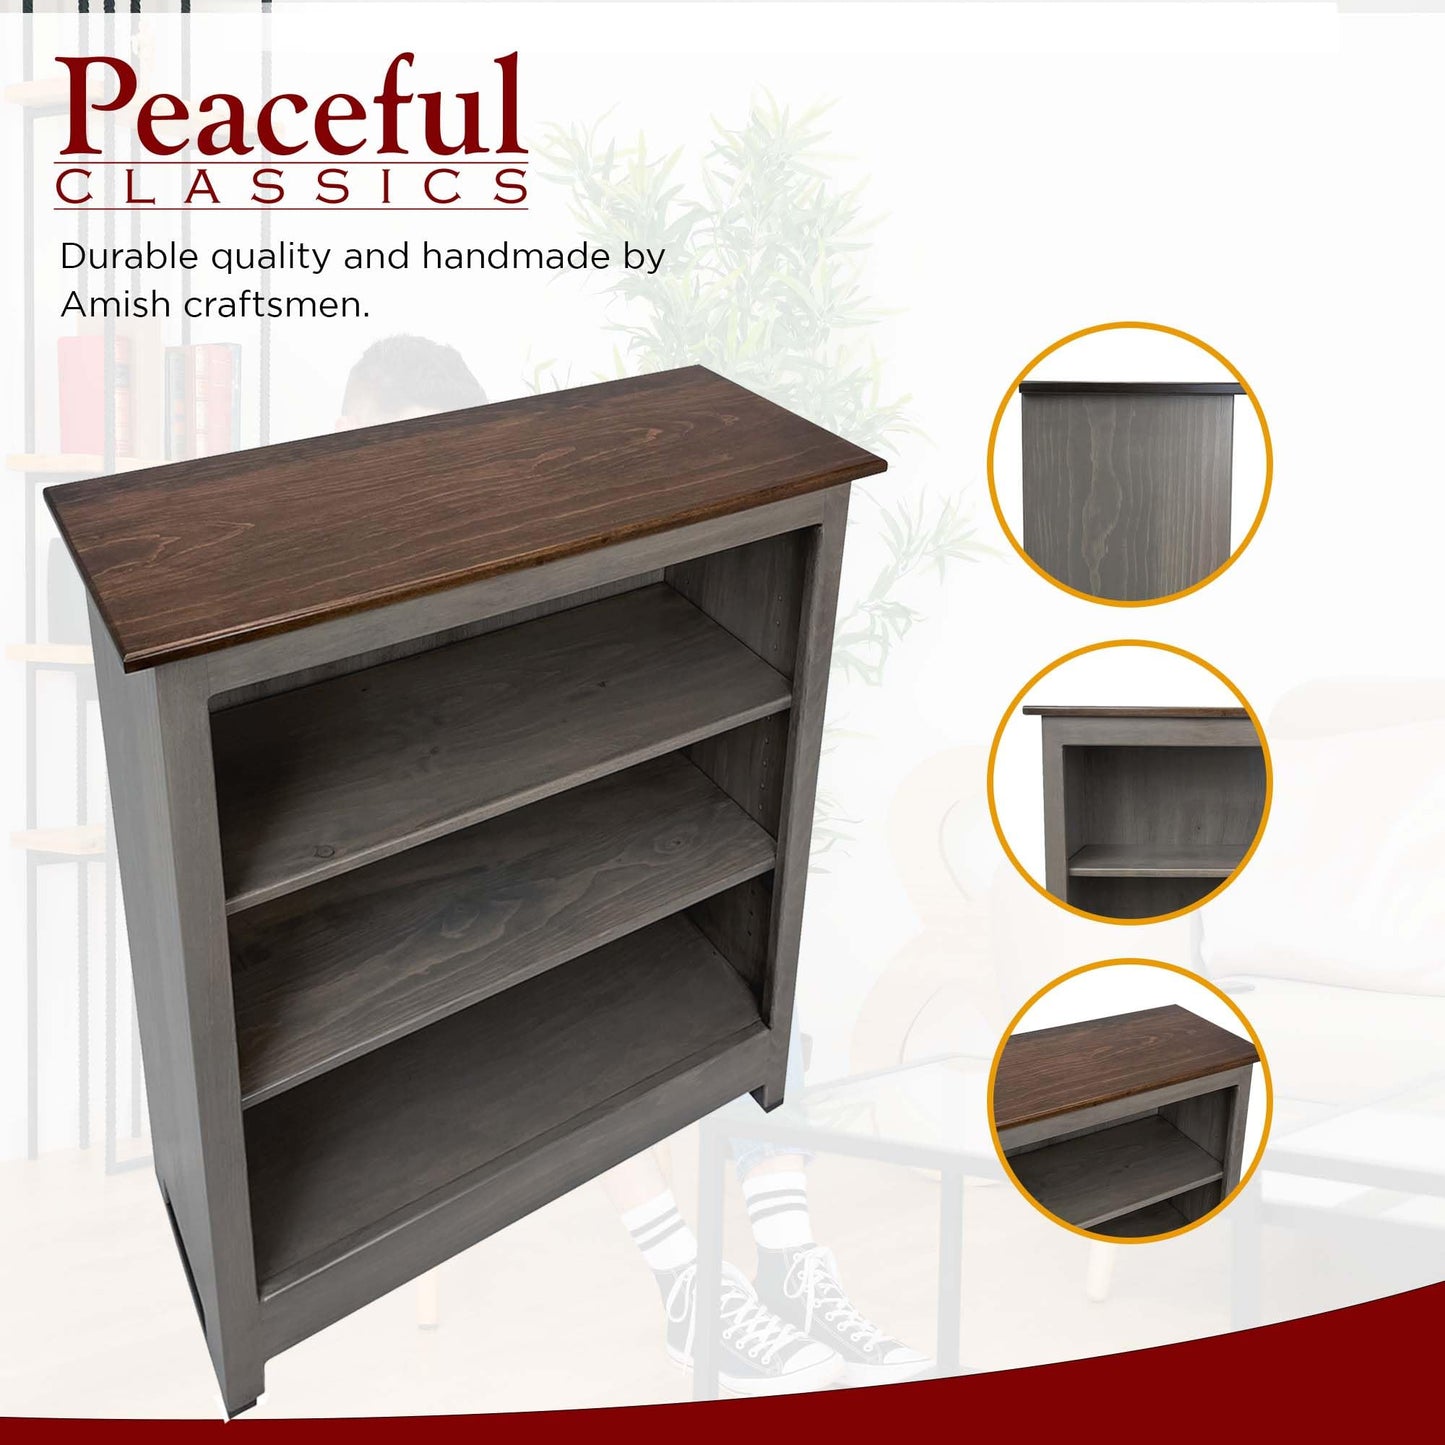 Peaceful Classics 3 Tier Bookcase, Adjustable Wooden Book Shelves for Small Spaces, Classroom, Bedroom, Office-Peaceful Classics